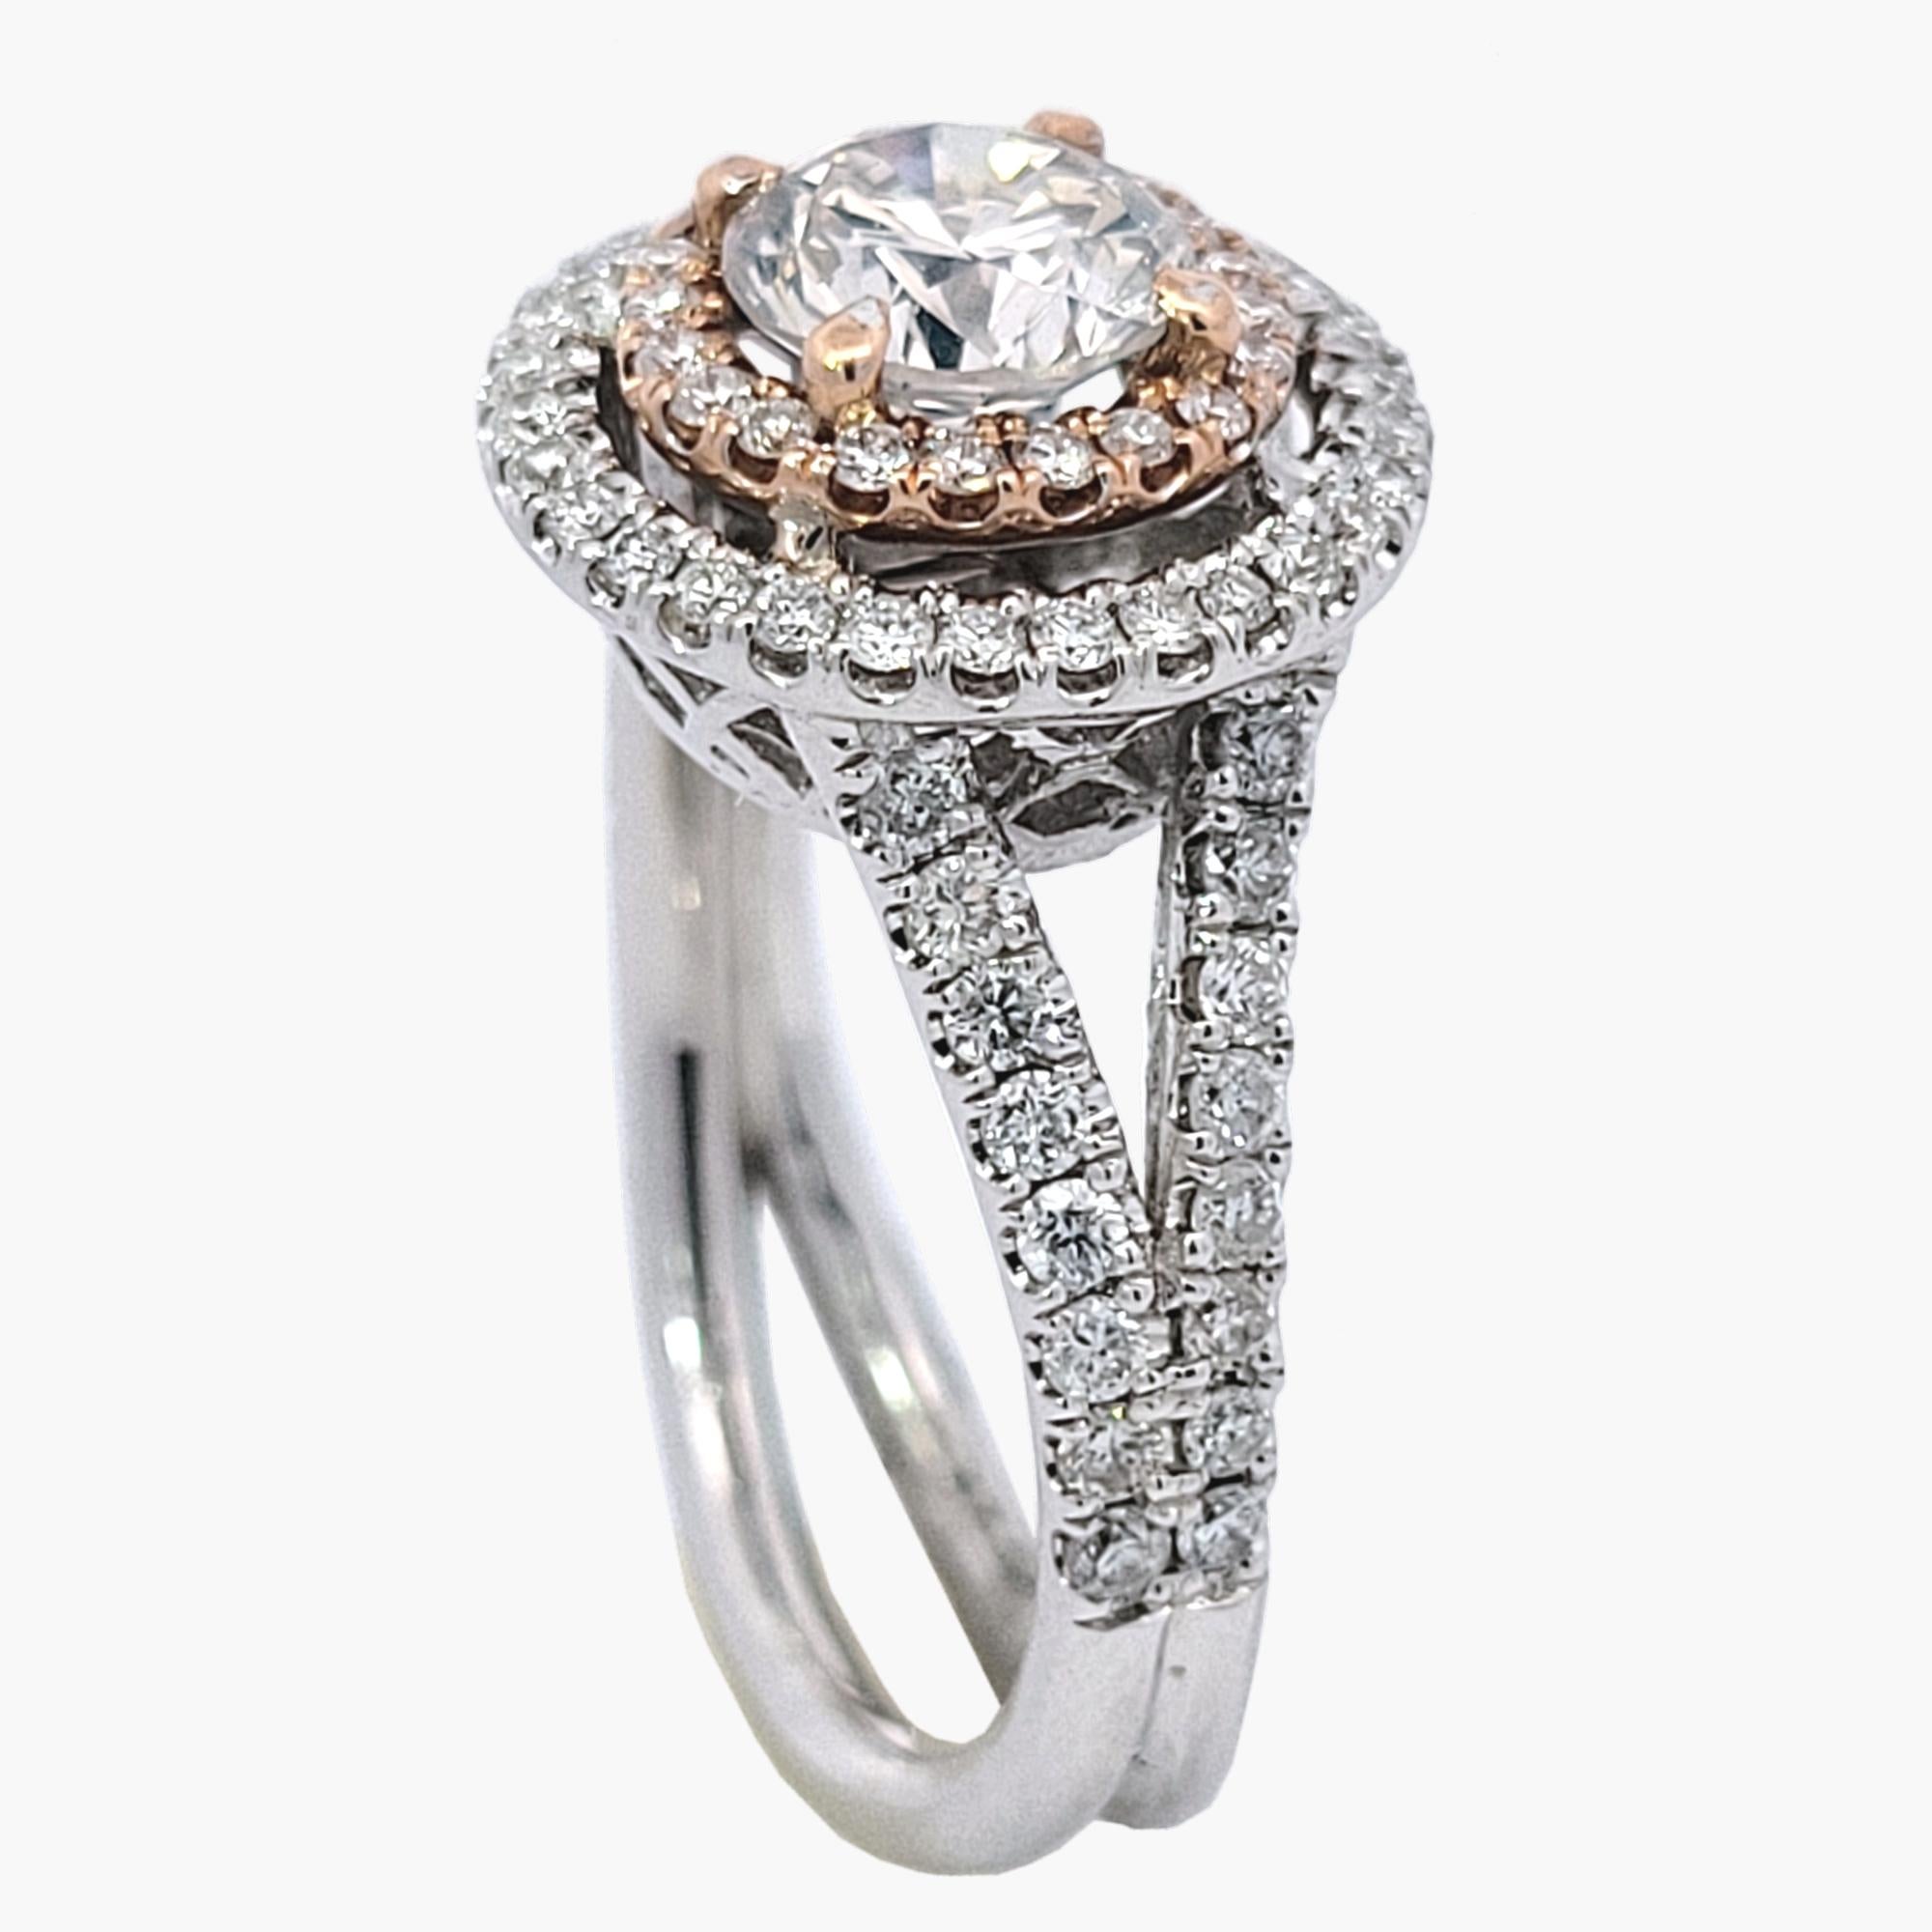 EGL 1.02 Ct J/VS2 Round Diamond 18K Double Halo Engagement Ring Split Shank In New Condition For Sale In Los Angeles, CA